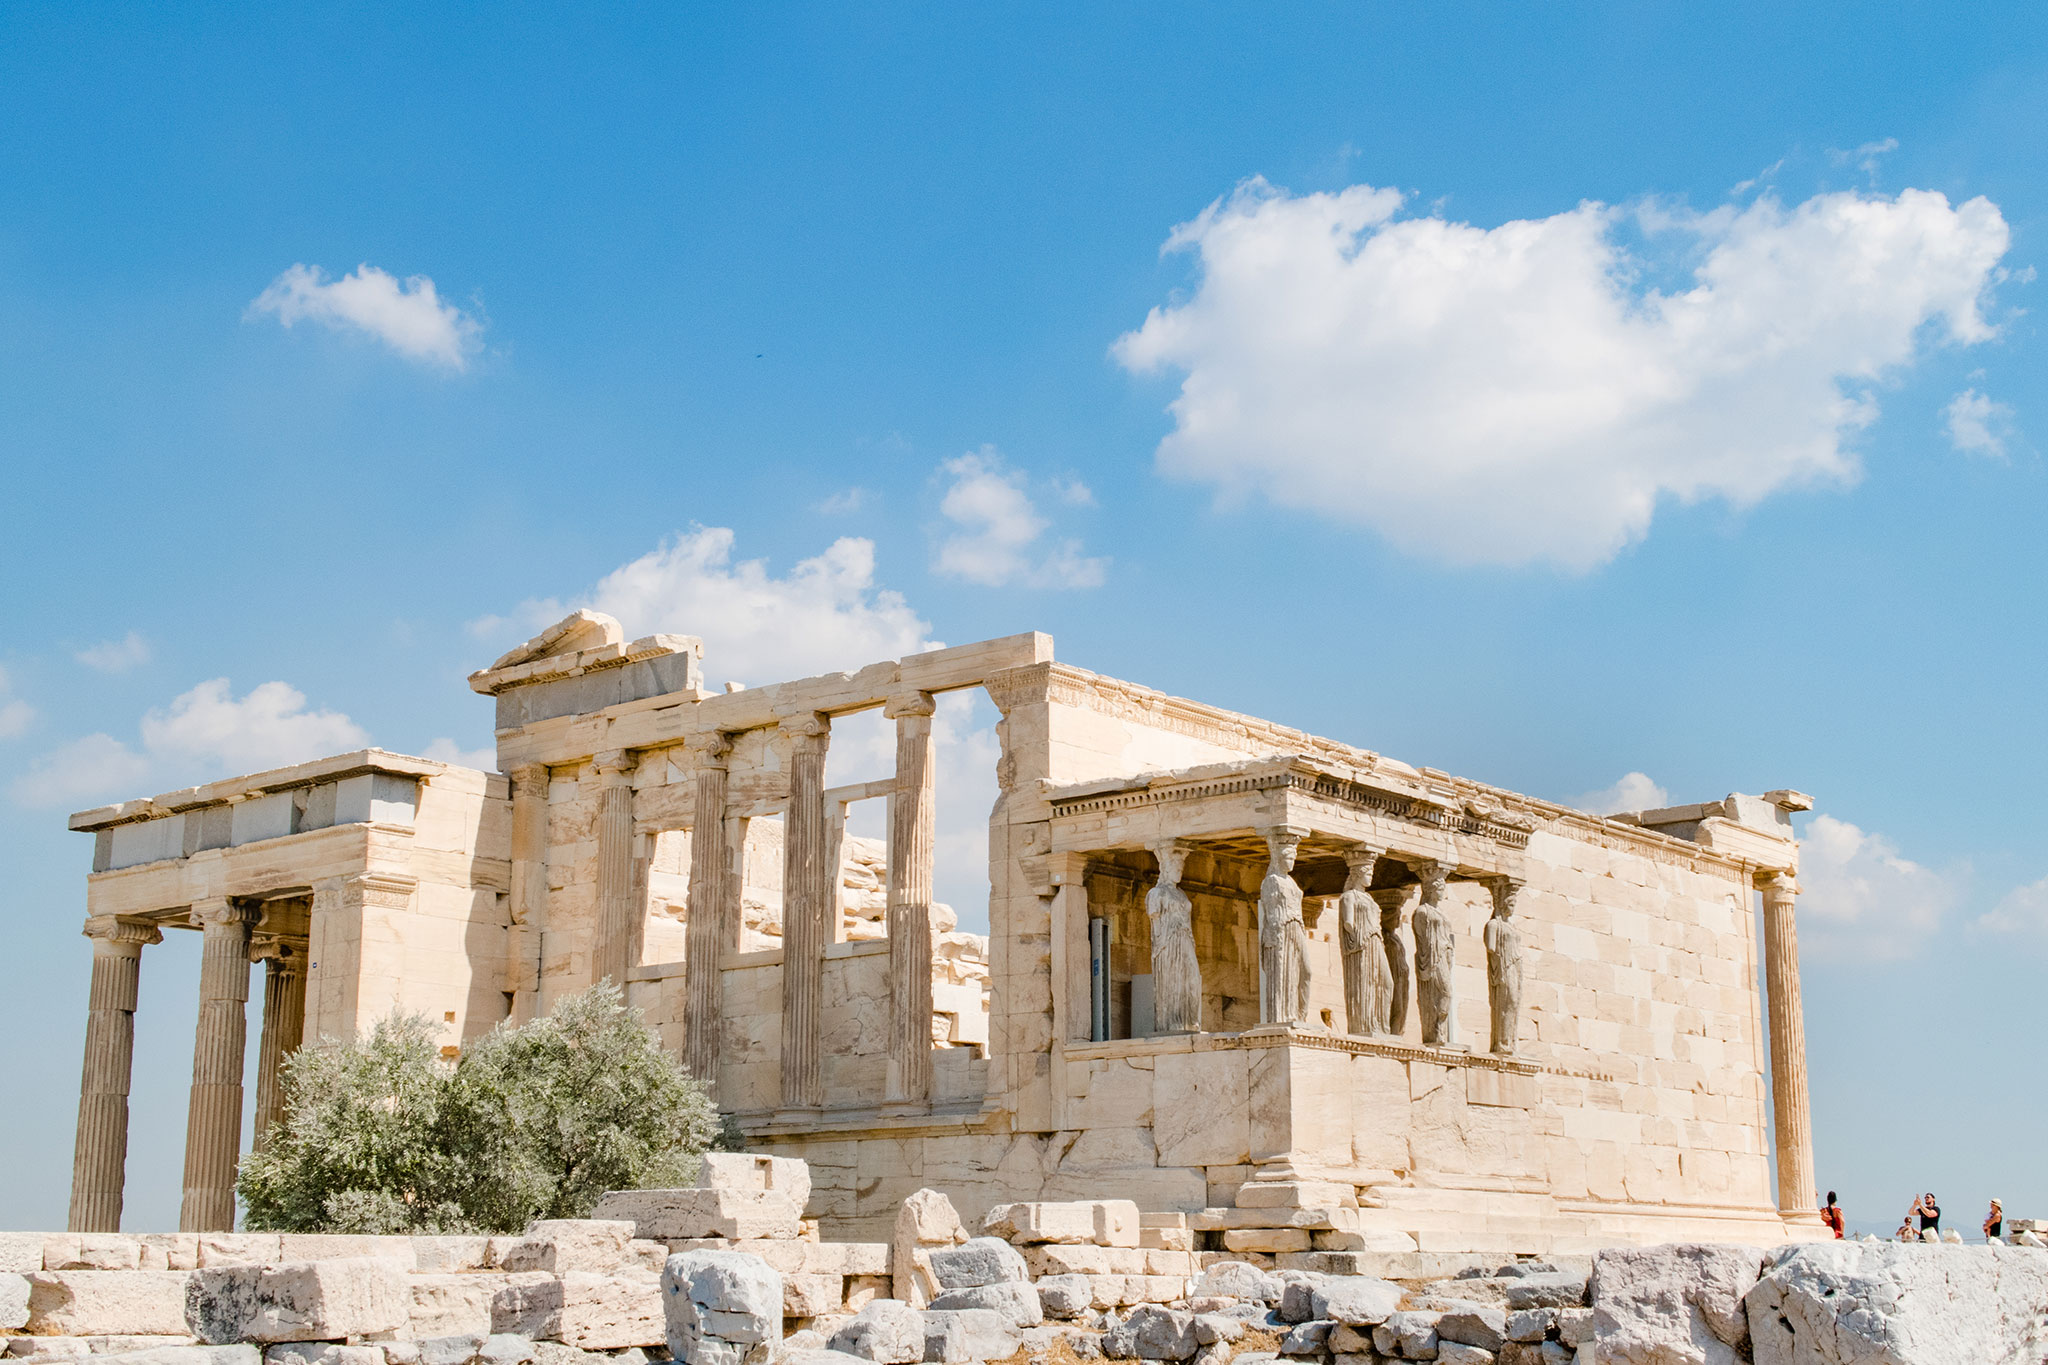 A view of the Erechtheion at the Acropolis, with its intricate marble columns and caryatid statues holding up the temple’s southern porch.